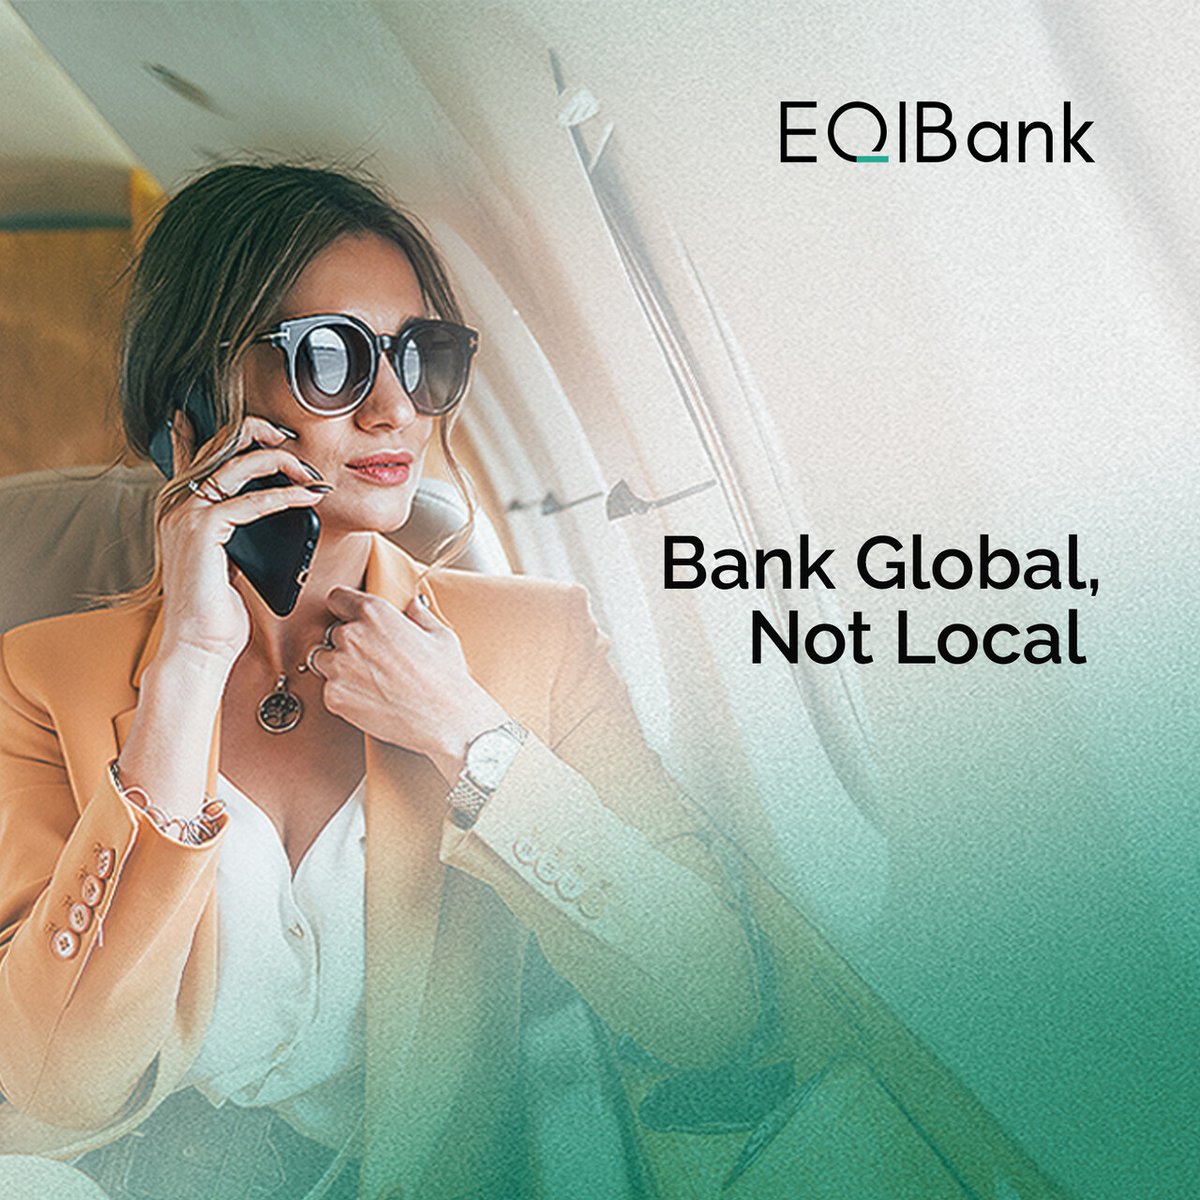 With a footprint spanning 180 countries, EQIBank liberates you to focus on your global ambitions without wrestling with financial complexities.

Reach out today and unlock a world of simplified, efficient, and secure global banking.

#EQIBank #businessbanking #corporatebanking